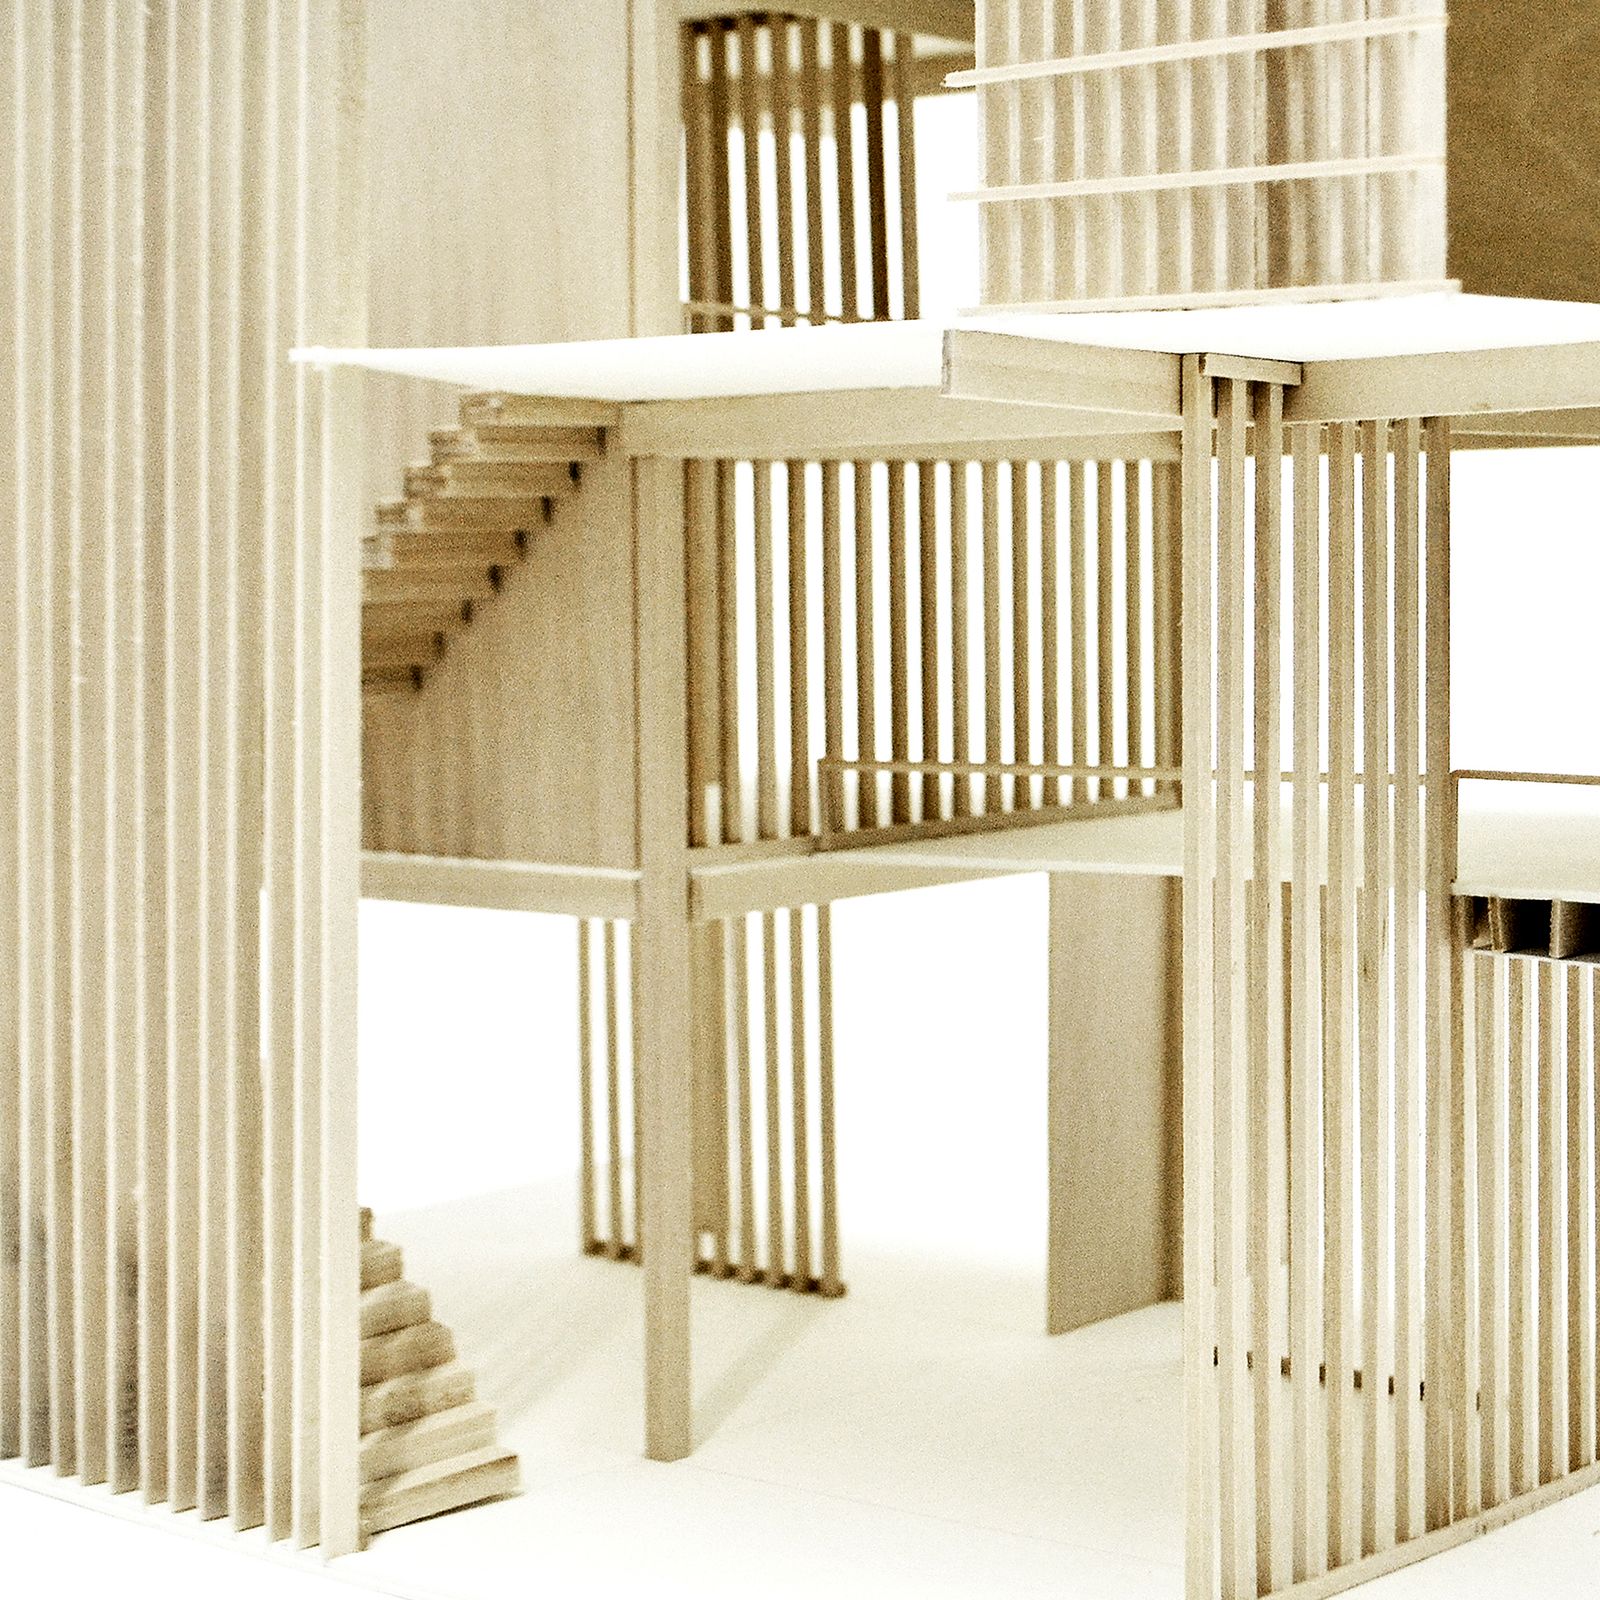 International Student Community Center - Detail Model Showing Vertical Screen Creating Layered Boundaries in a Building Proposal